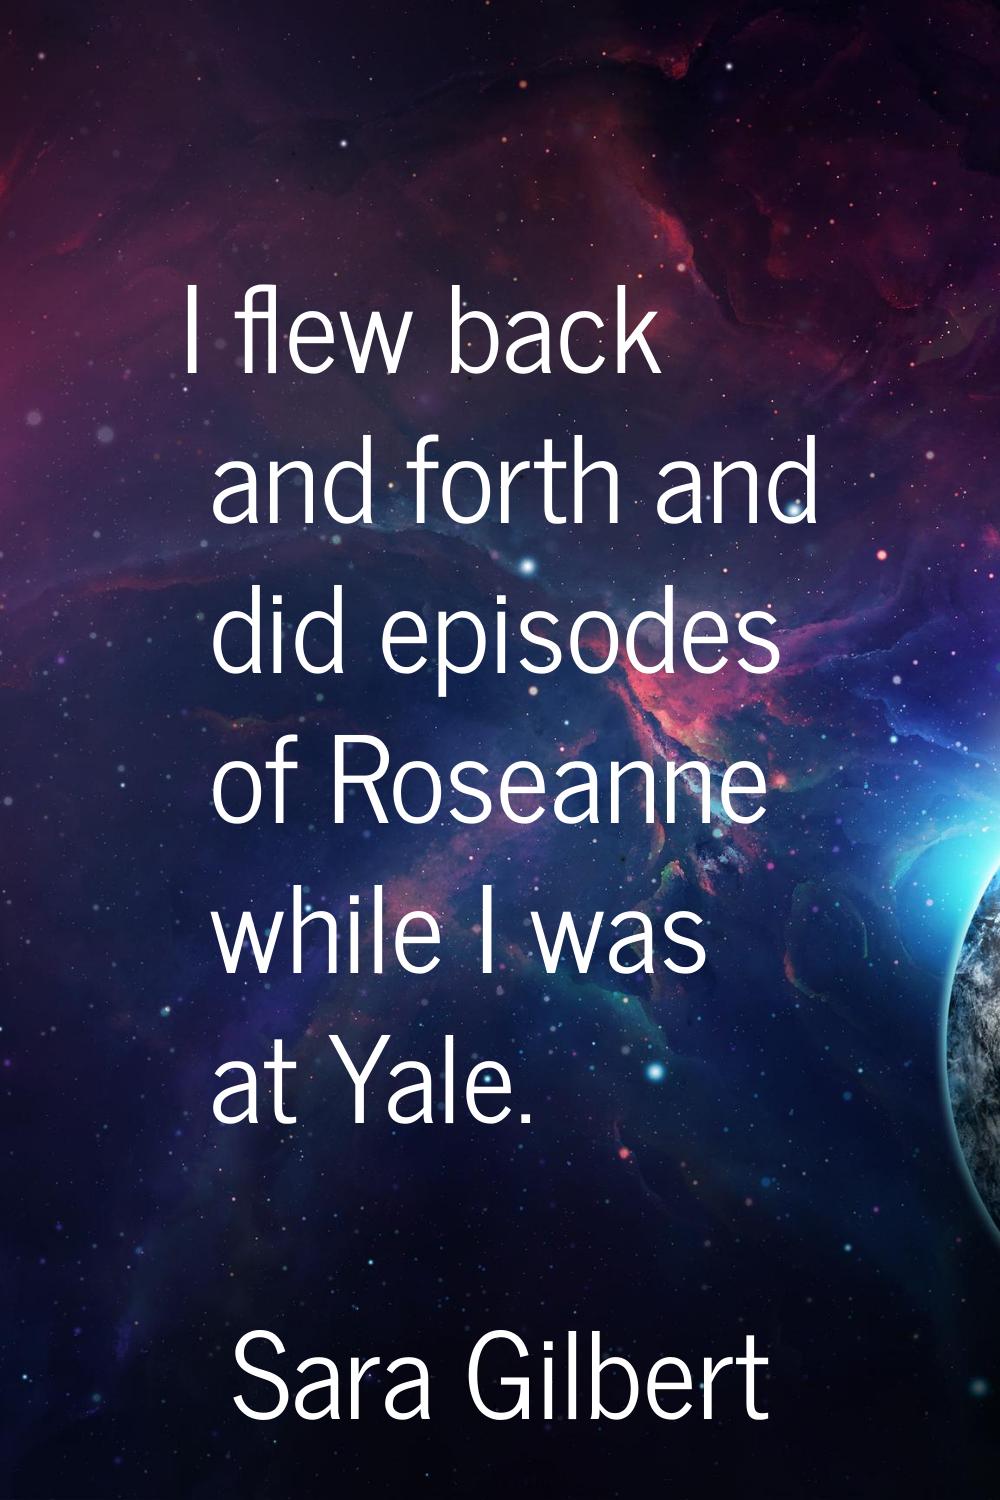 I flew back and forth and did episodes of Roseanne while I was at Yale.